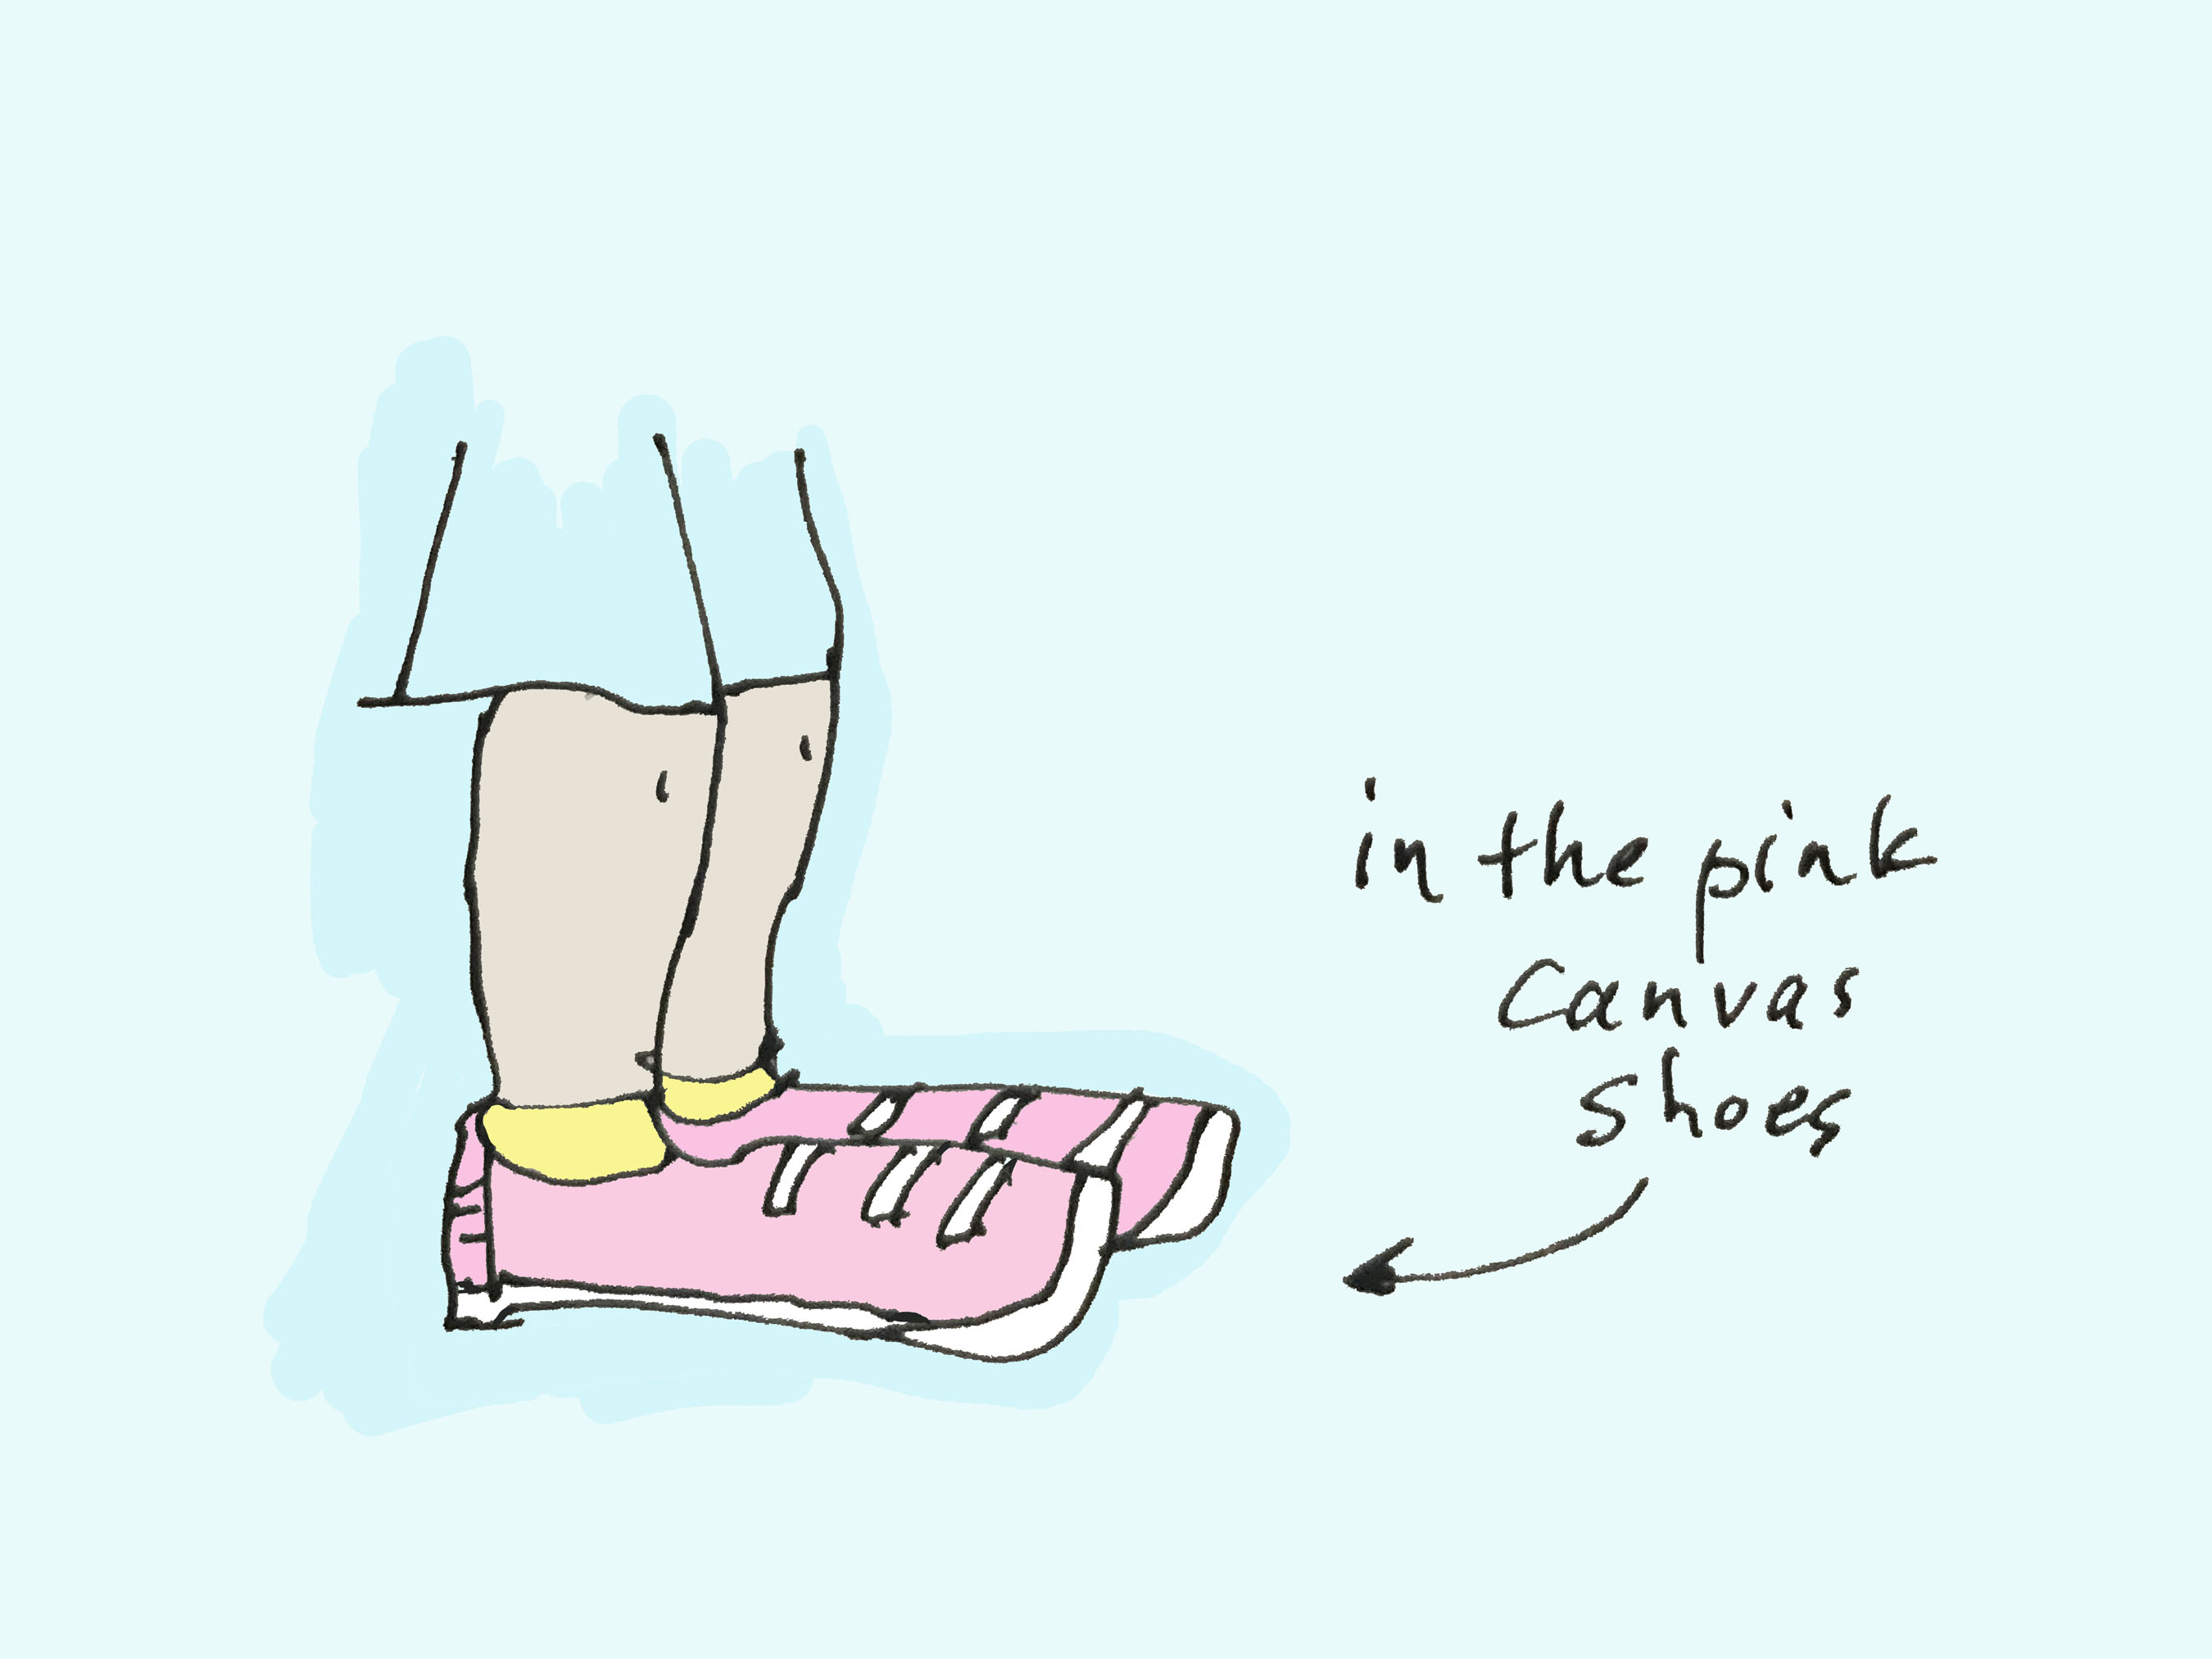 ART EVERY DAY NUMBER 408 / ILLUSTRATION / PINK CANVAS SHOES